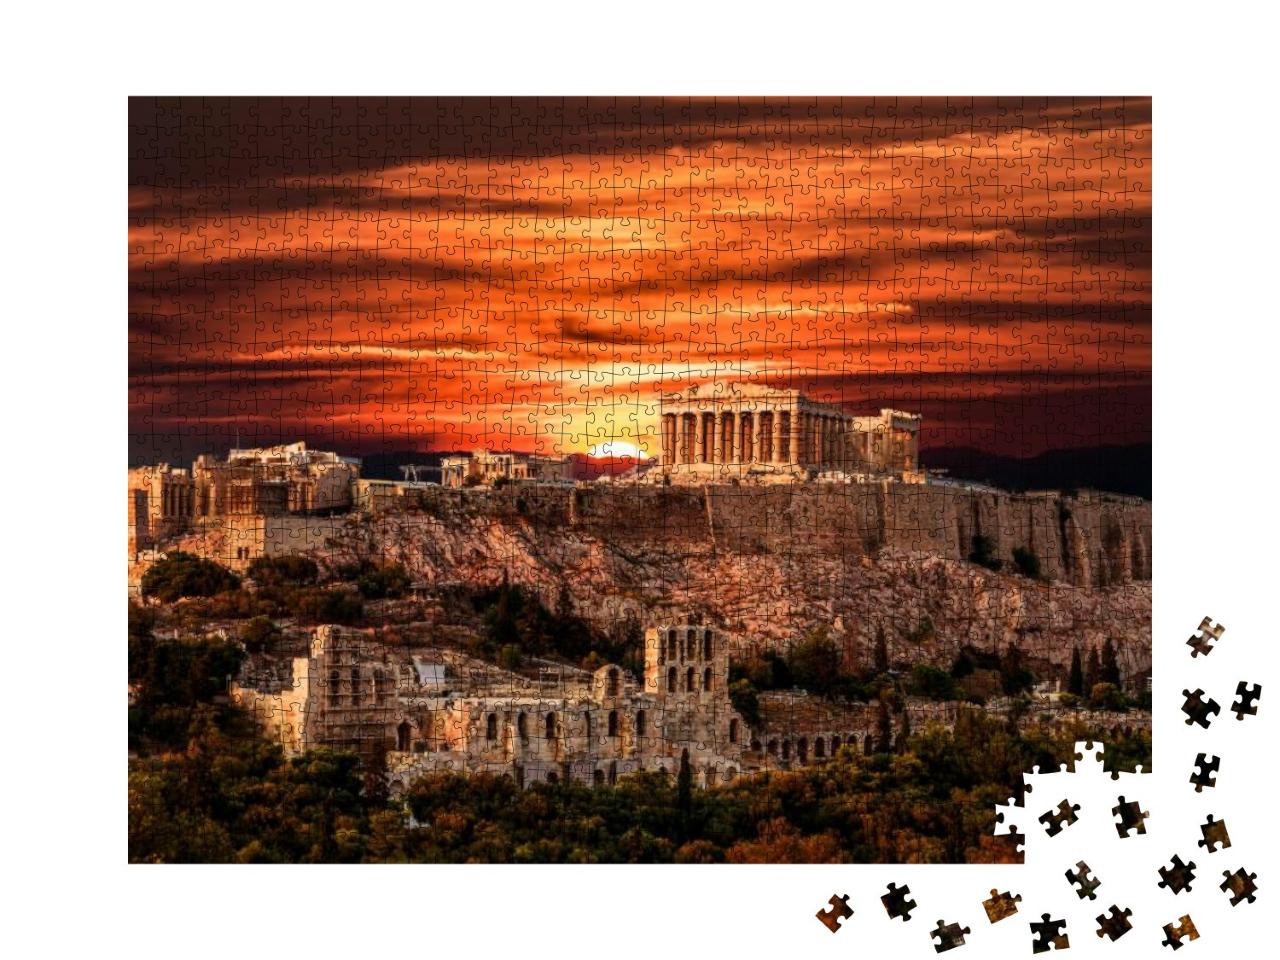 Parthenon, Acropolis of Athens, Under Dramatic Sunset Sky... Jigsaw Puzzle with 1000 pieces